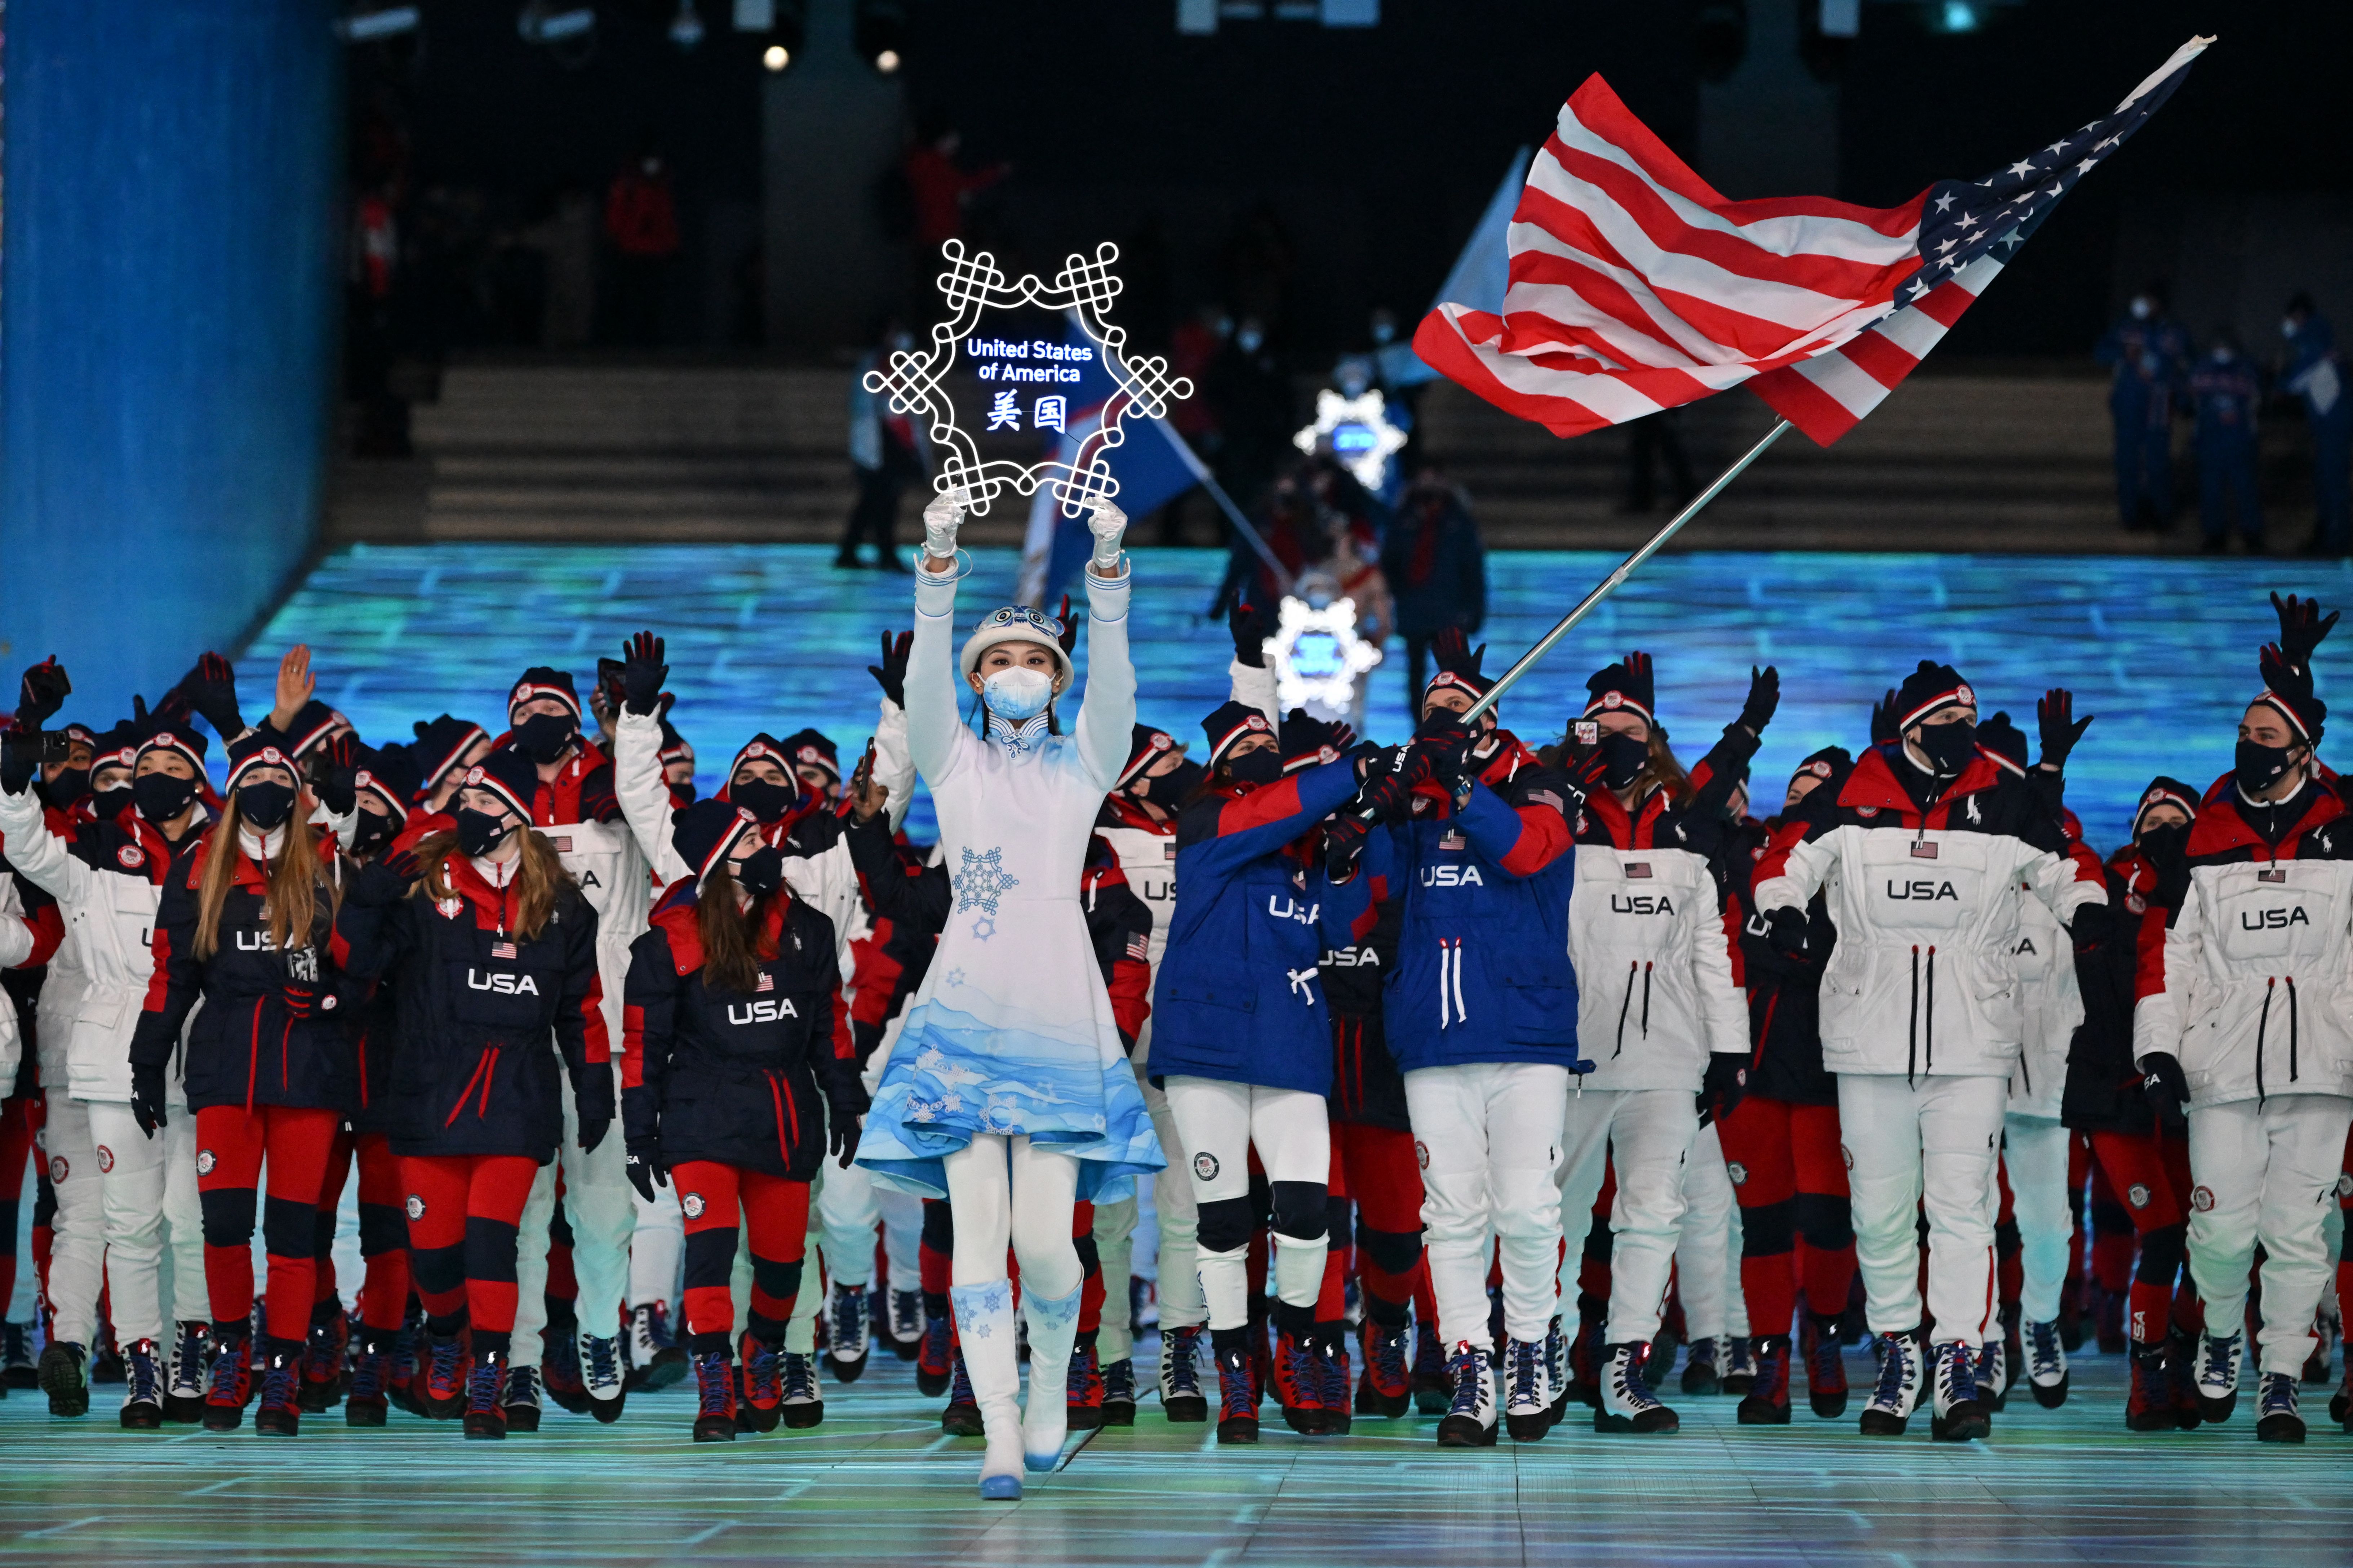 Members of the United States Olympic Team take part in the parade of nations during the Opening Ceremony.